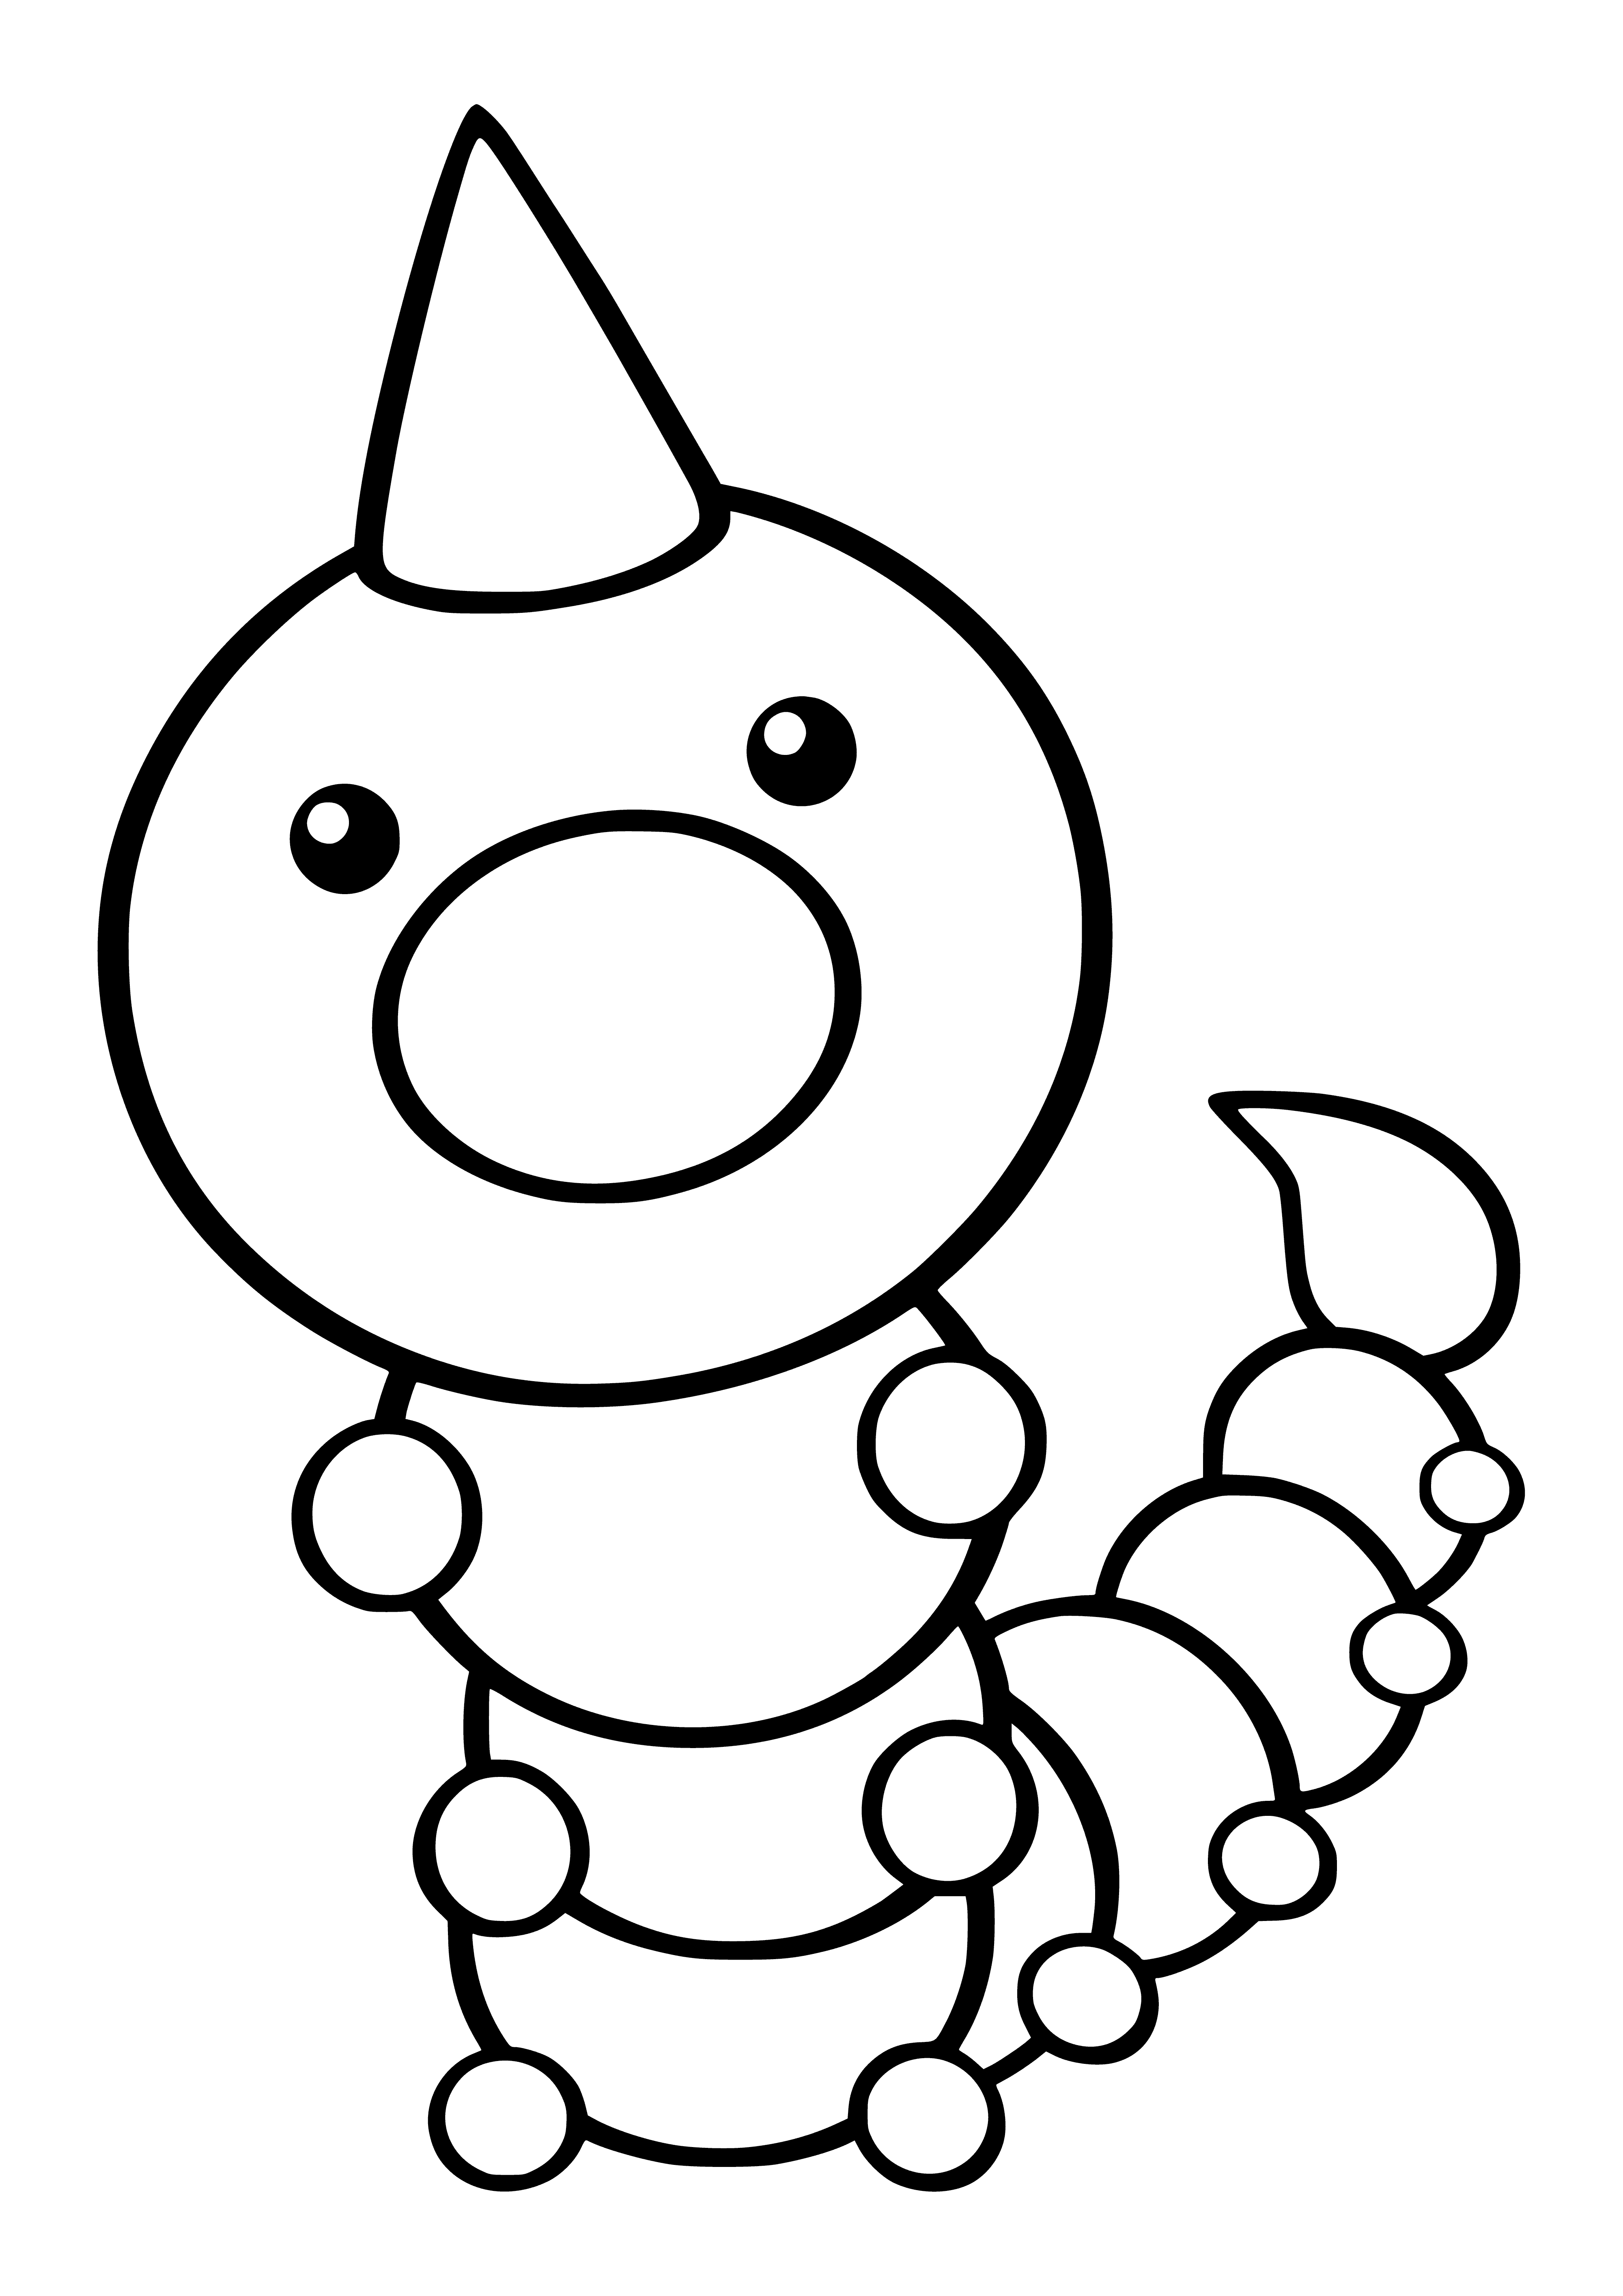 coloring page: A small yellow Pokemon with red proboscis, black segmented body, and six black legs. Red eyes and black head. #pokemon #weedle